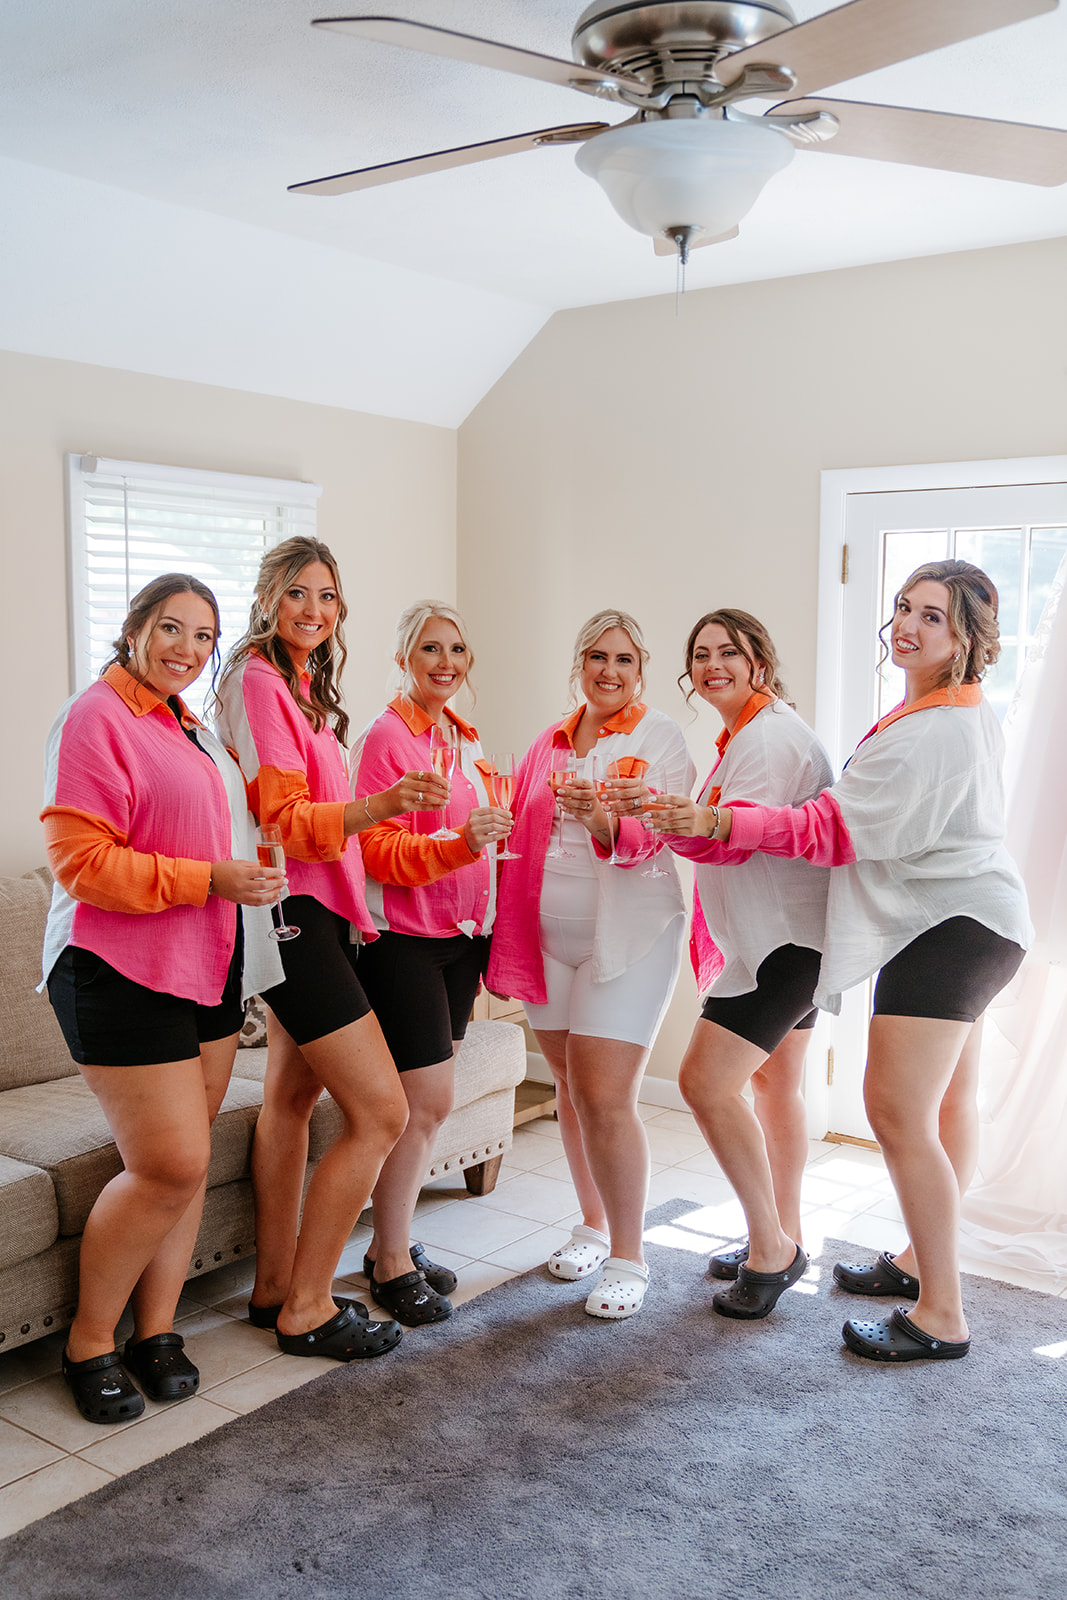 Bride and bridesmaids in white shorts and pink buttoned shirts, holding champagne are posing for a photo in their getting ready outfits for bride's wedding at lakeview pavilion